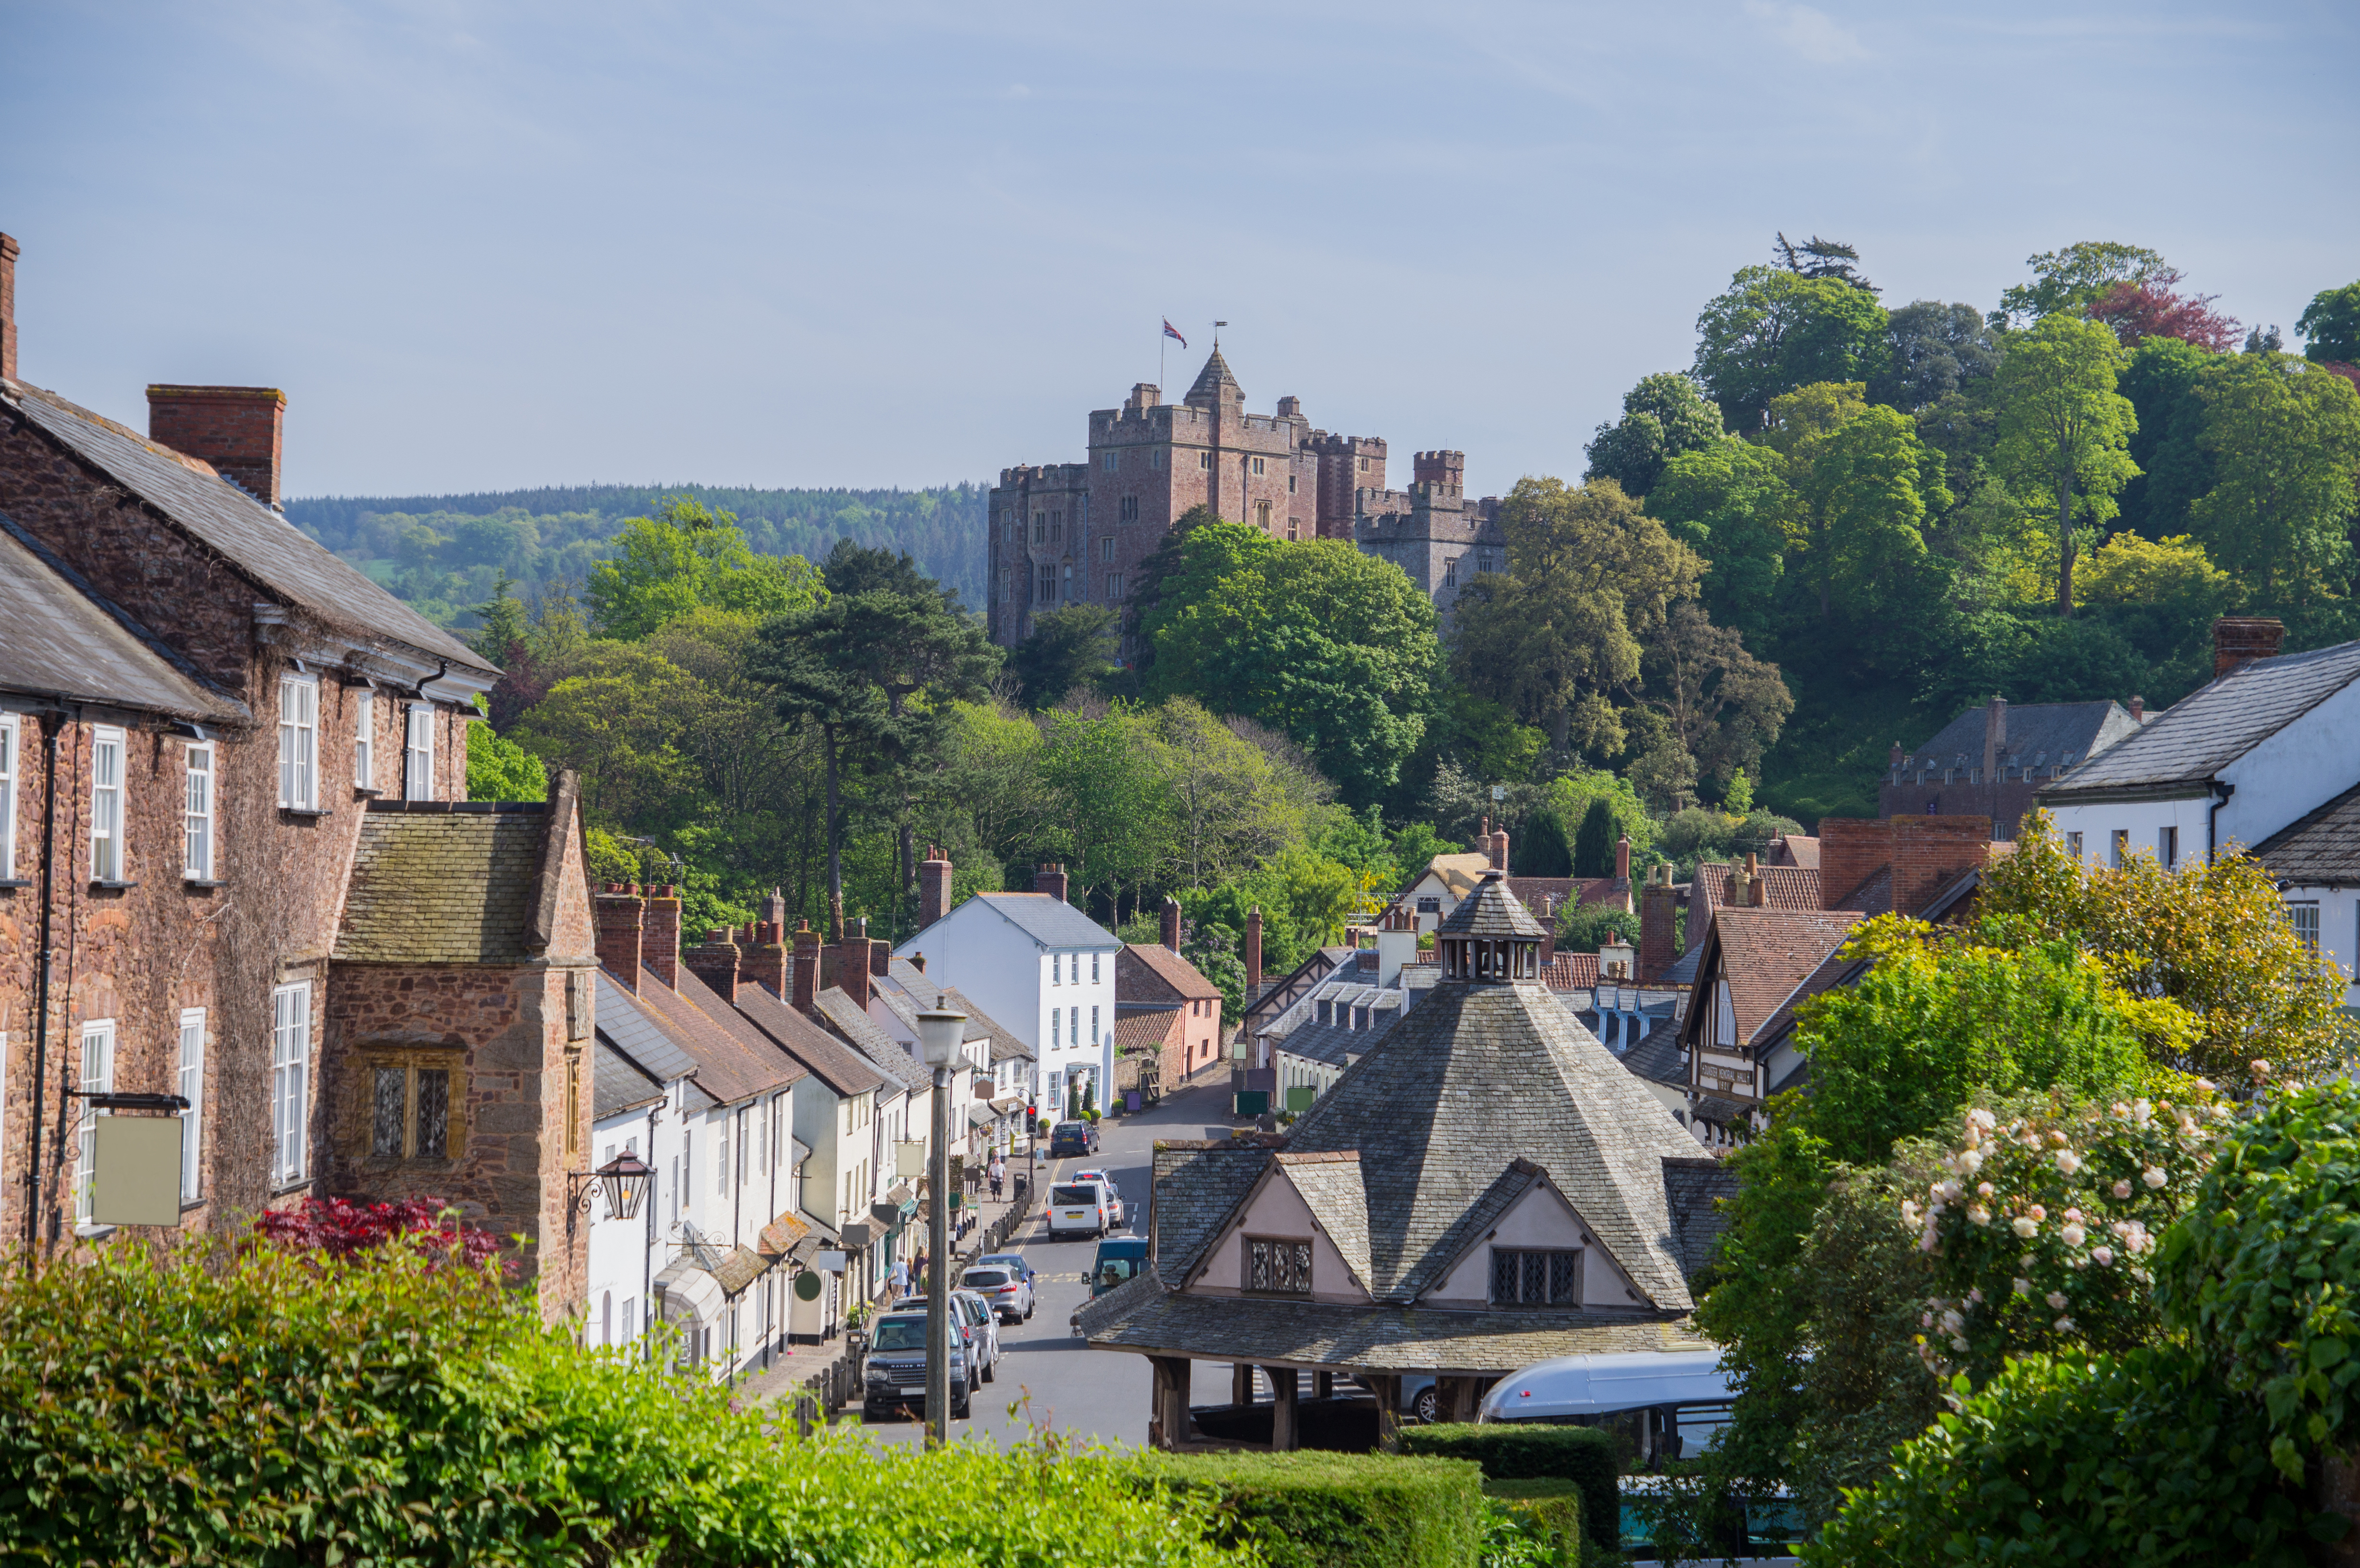 A street scene of Dunster village. It's a sunny day and a row of houses sits in front of Dunster Castle in the distance.